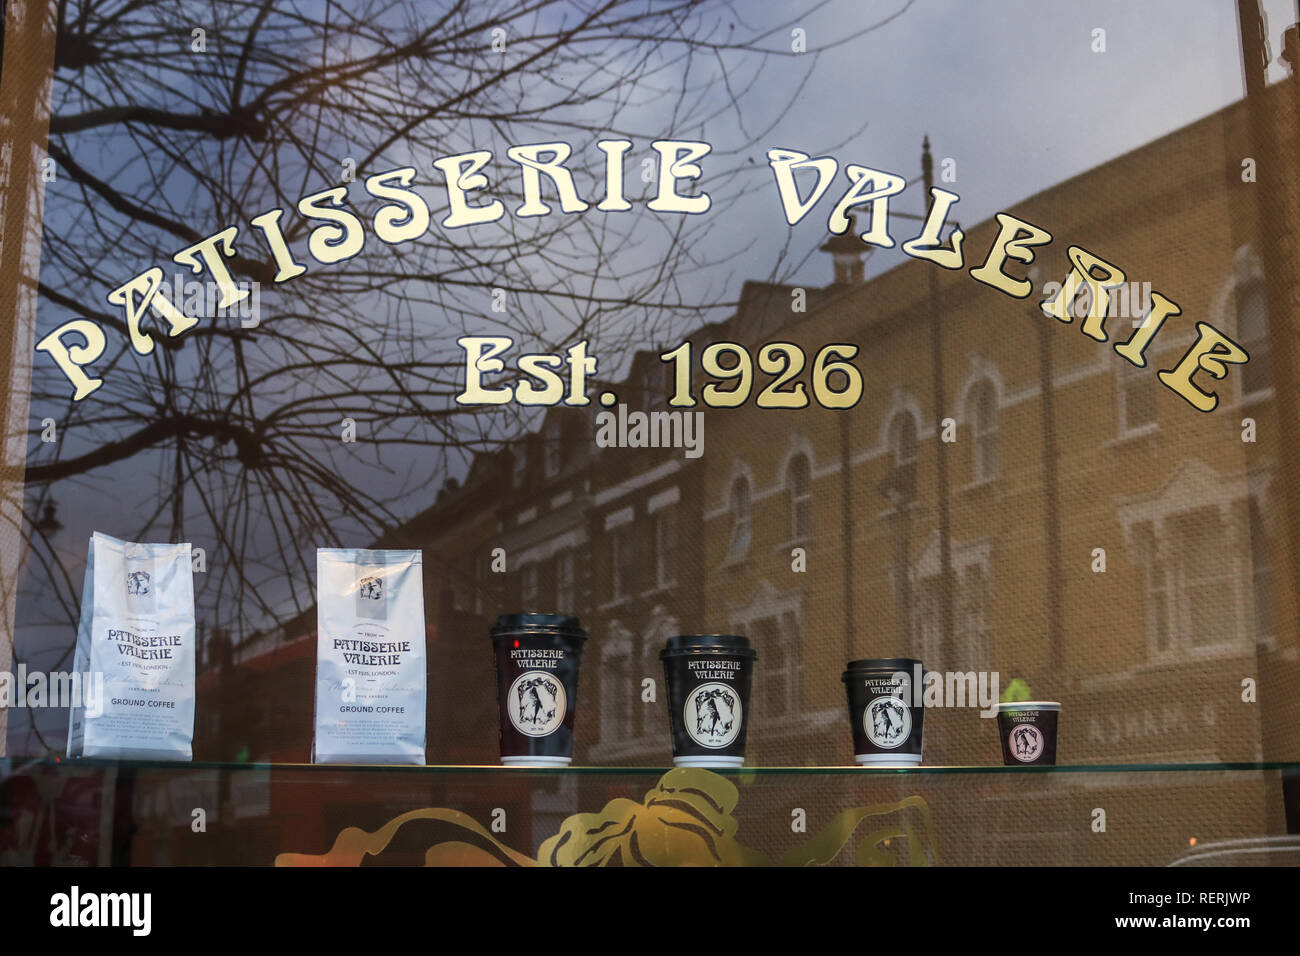 London UK. 23rd January 2019. A Patisserie Valerie chain in Wimbledon High Street. Patisserie Valerie has fallen into administration putting more than 3,000 jobs at risk as the cafe chain is plunged into crisis after a £40m black hole was discovered in its accounts Credit: amer ghazzal/Alamy Live News Stock Photo